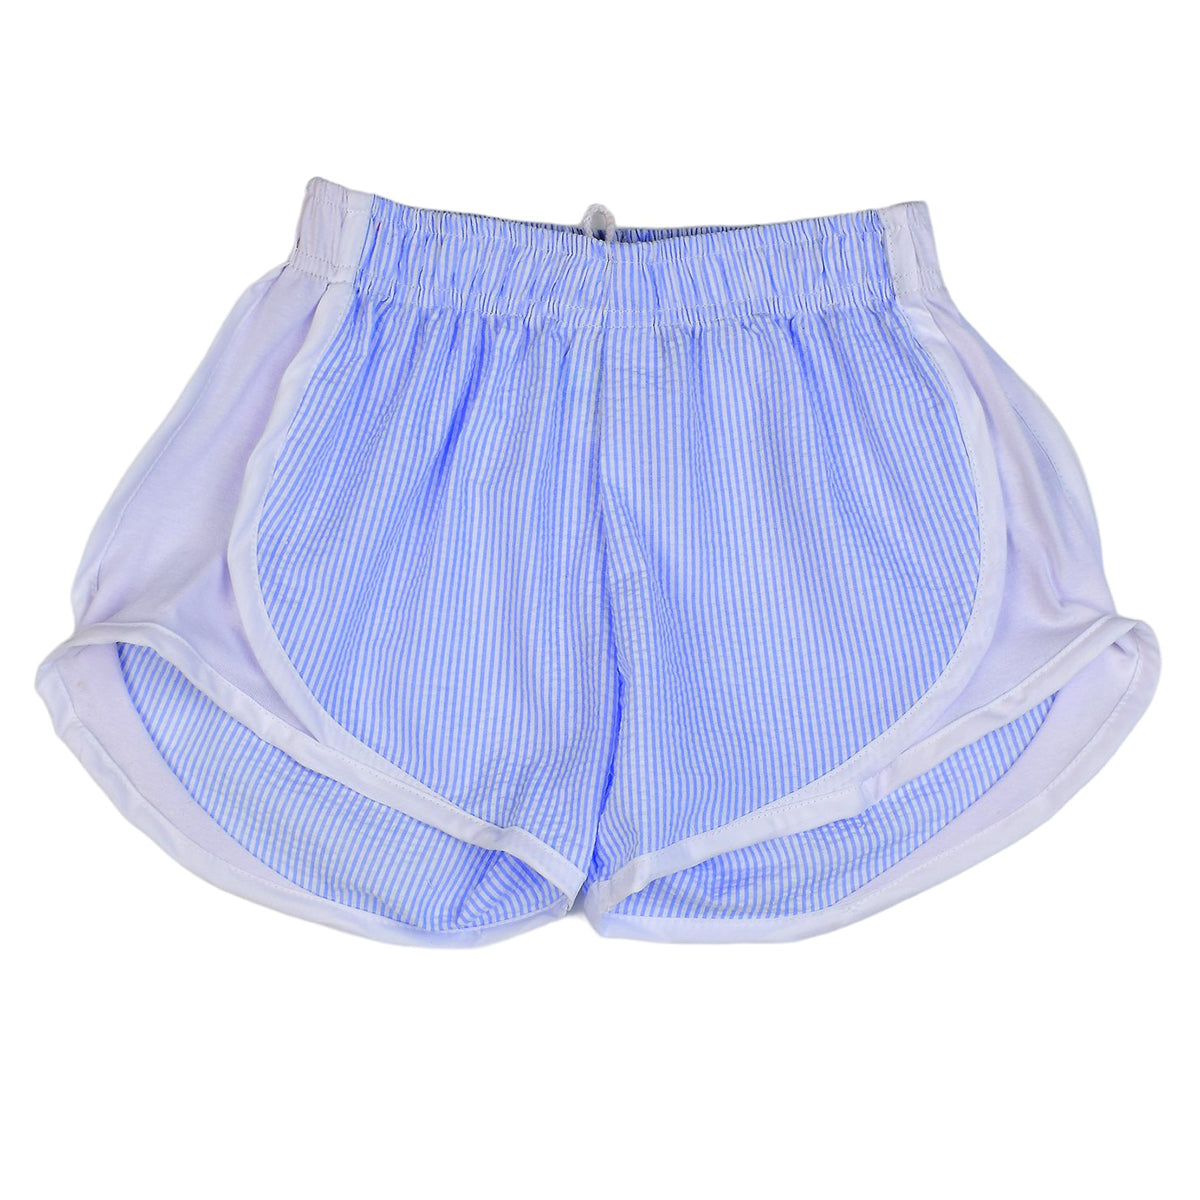 Color Works Shorts - Blue Stripe with White Sides